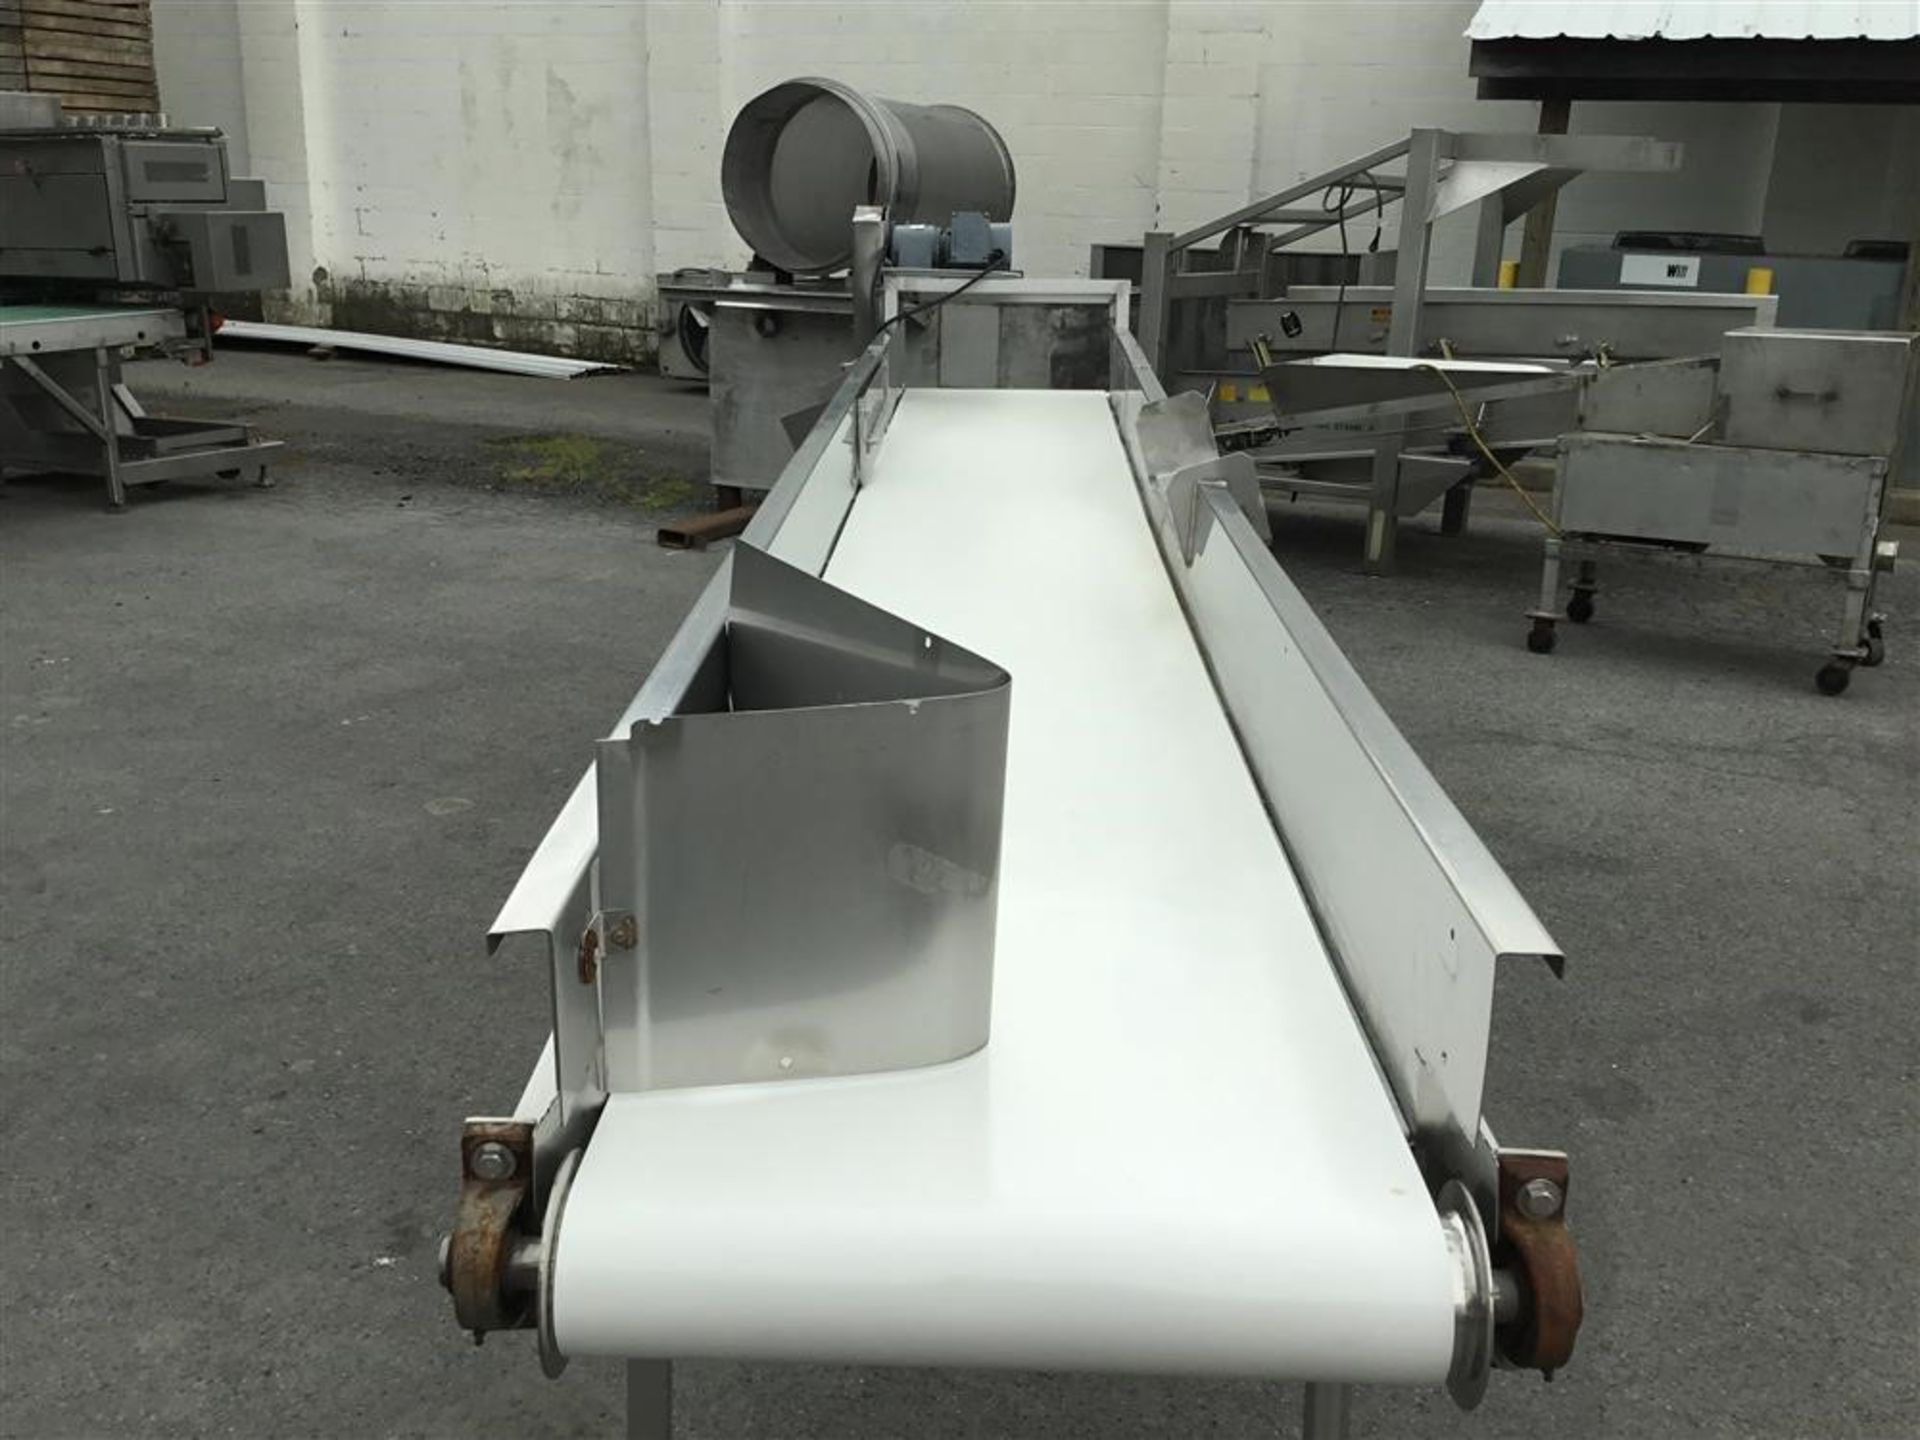 S/S Conveyor Belt with White PVC, 24" W x 14' L, 1/2 hp, 3 Ph, 208/230 with Diverter Opening, New - Image 2 of 3